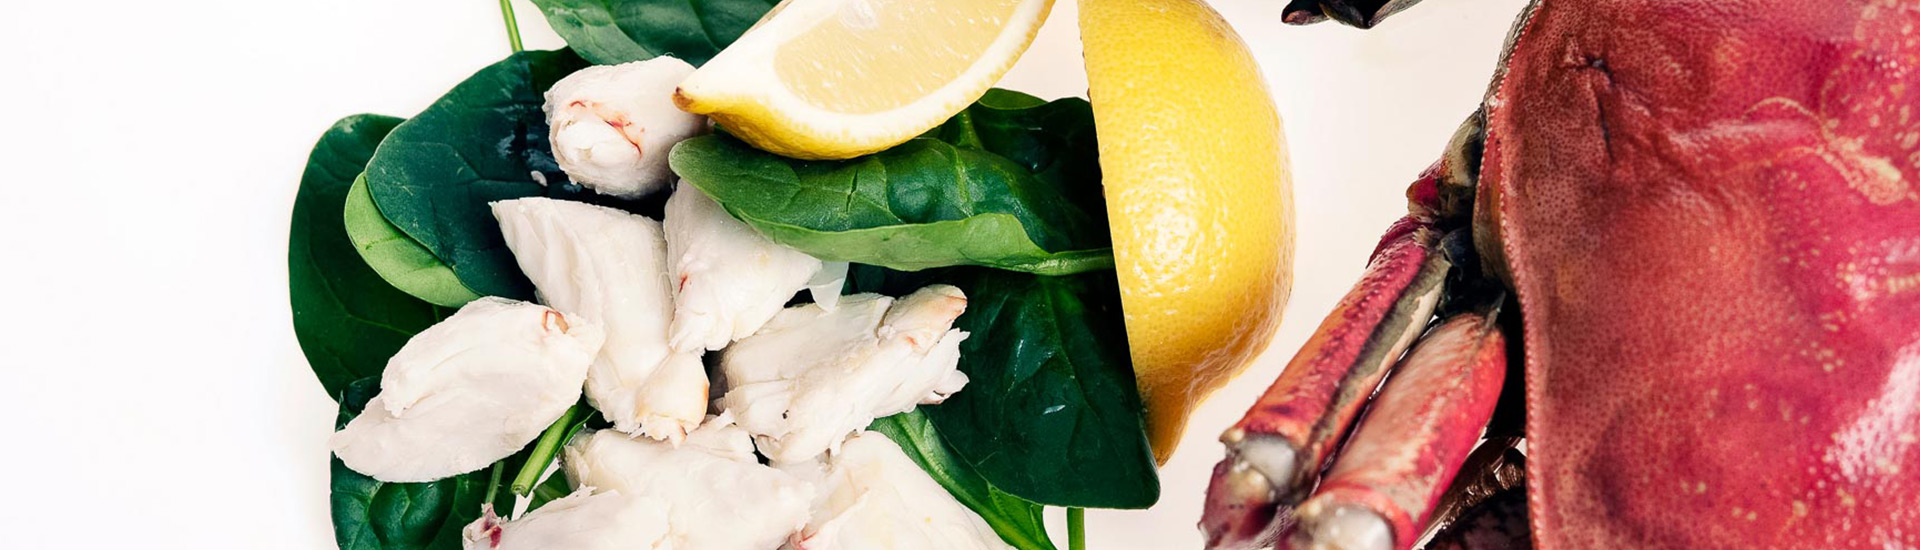 white chicken on a bed of greens, a lemon slice, and close up of a crab